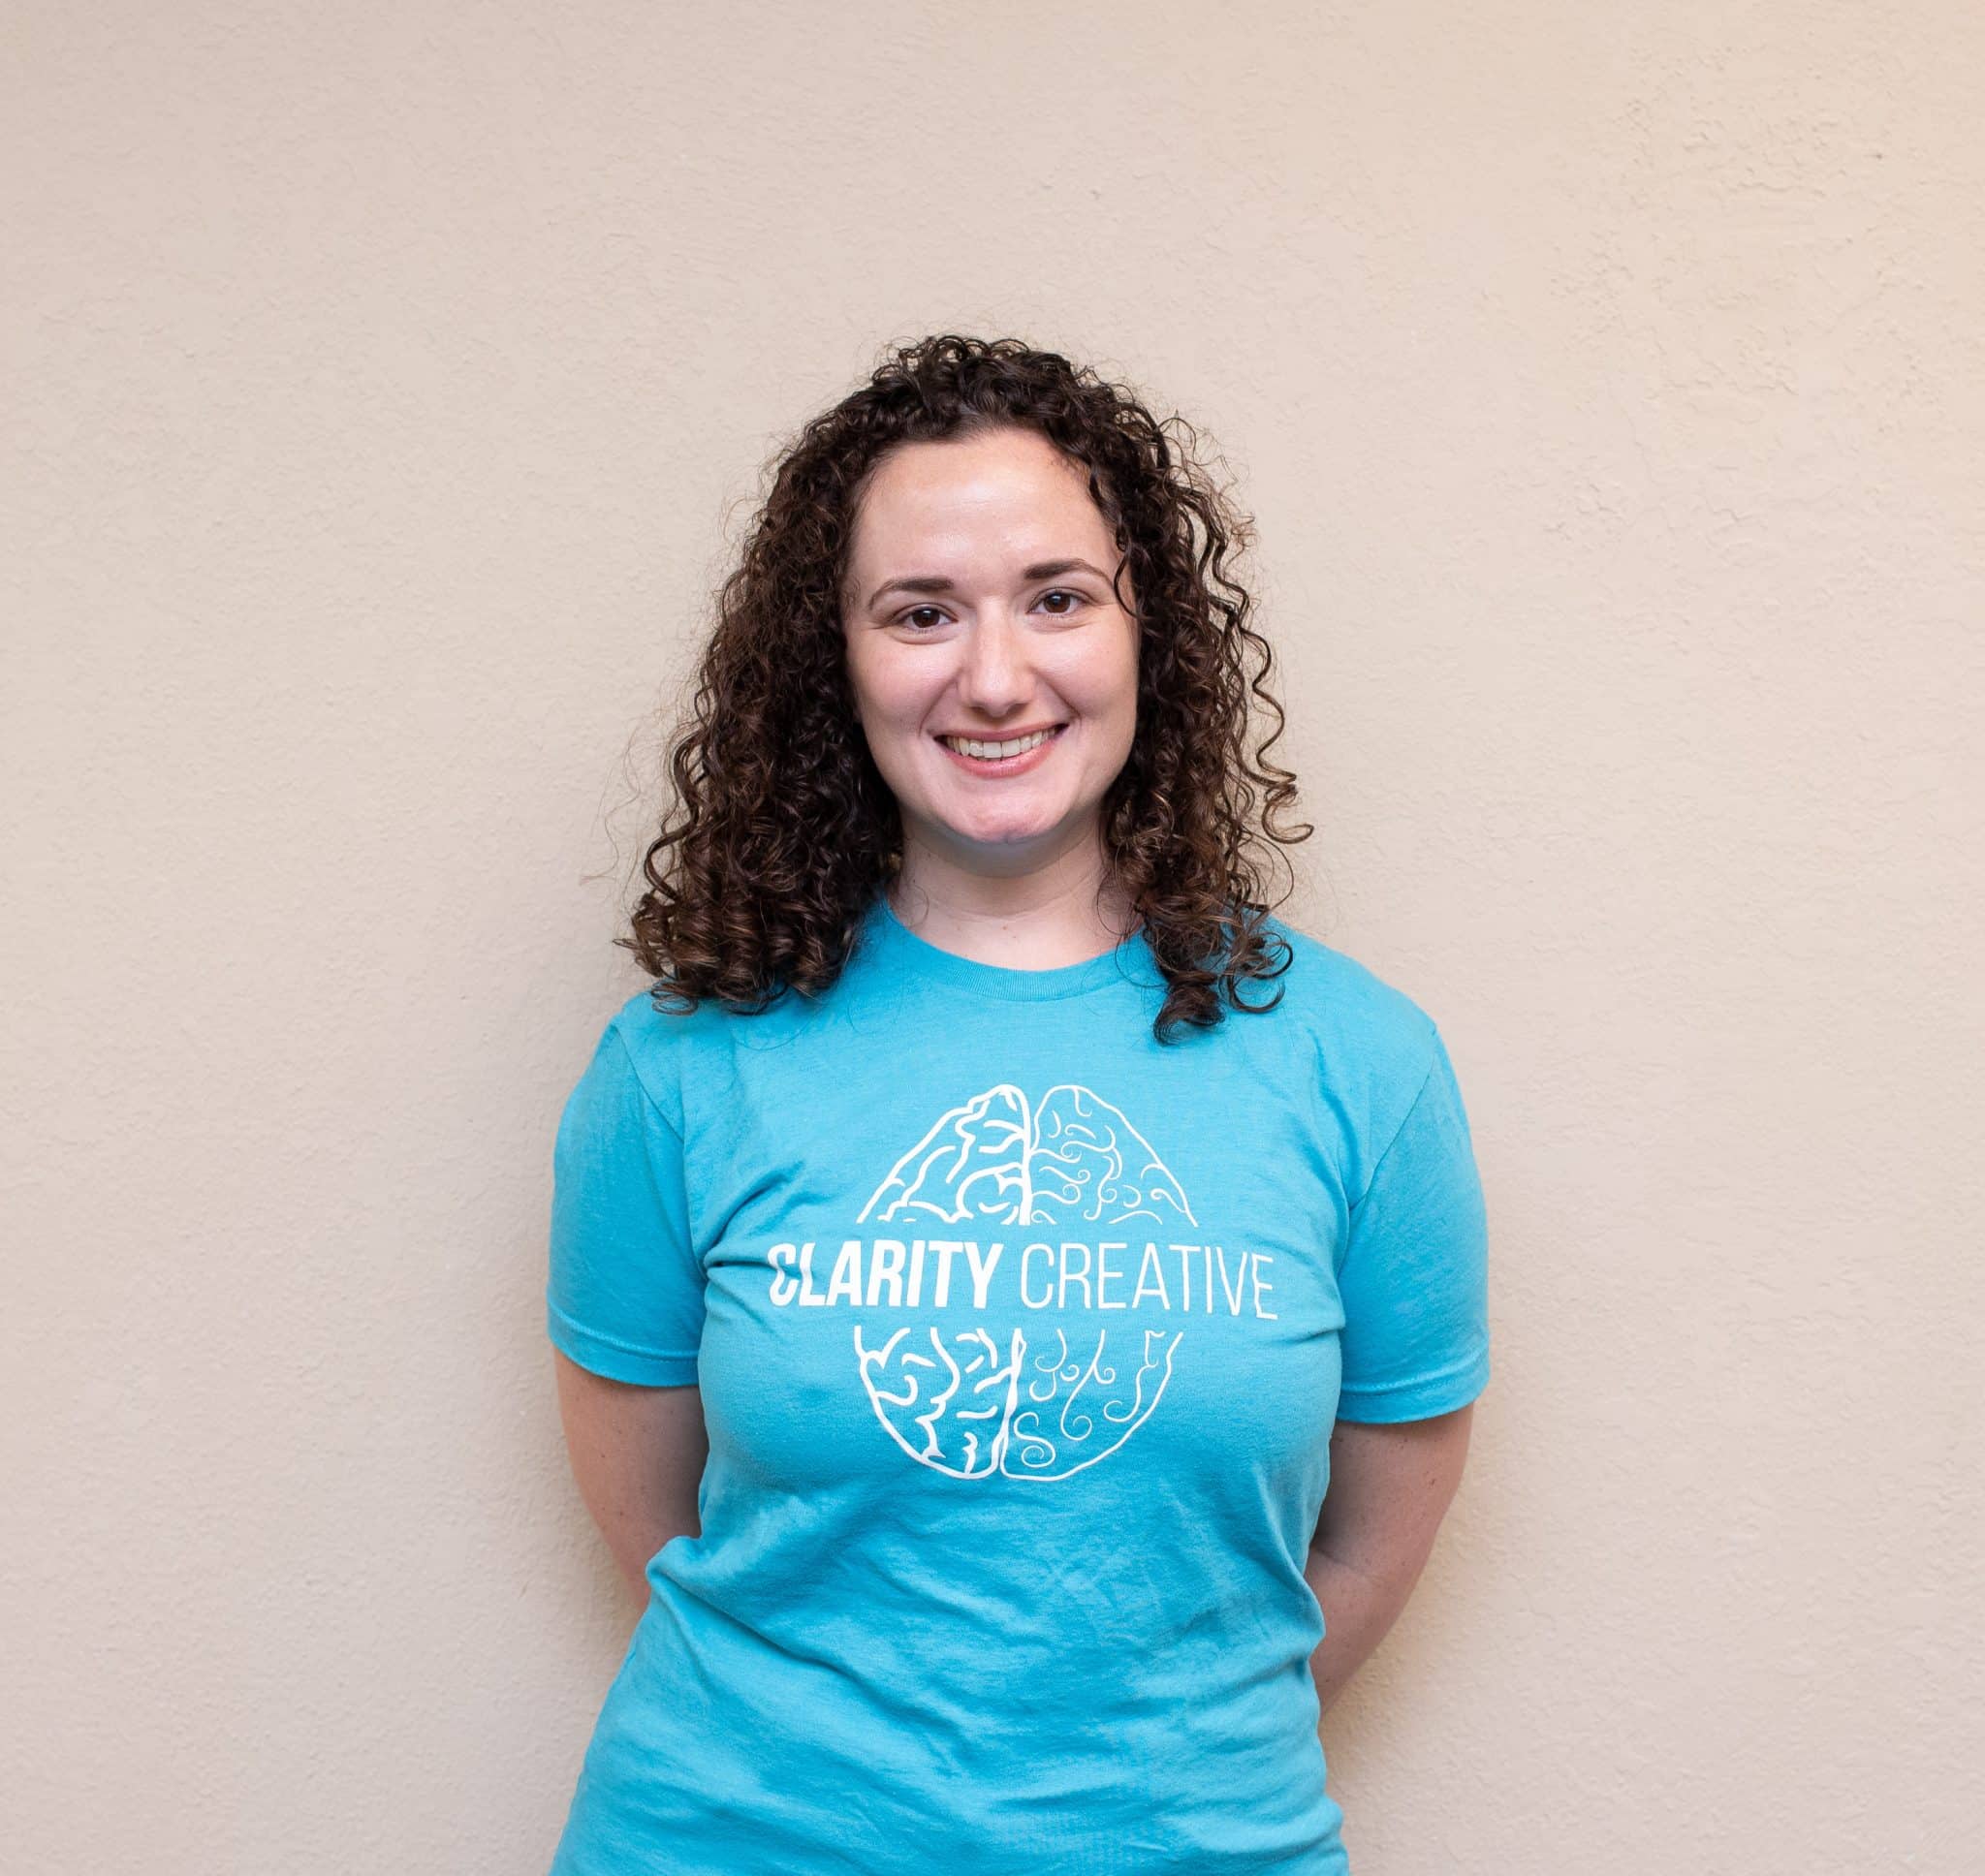 Neri of Clarity Creative Group. She is smiling at the camera, has brown curly hair, and is wearing a teal Clarity shirt.